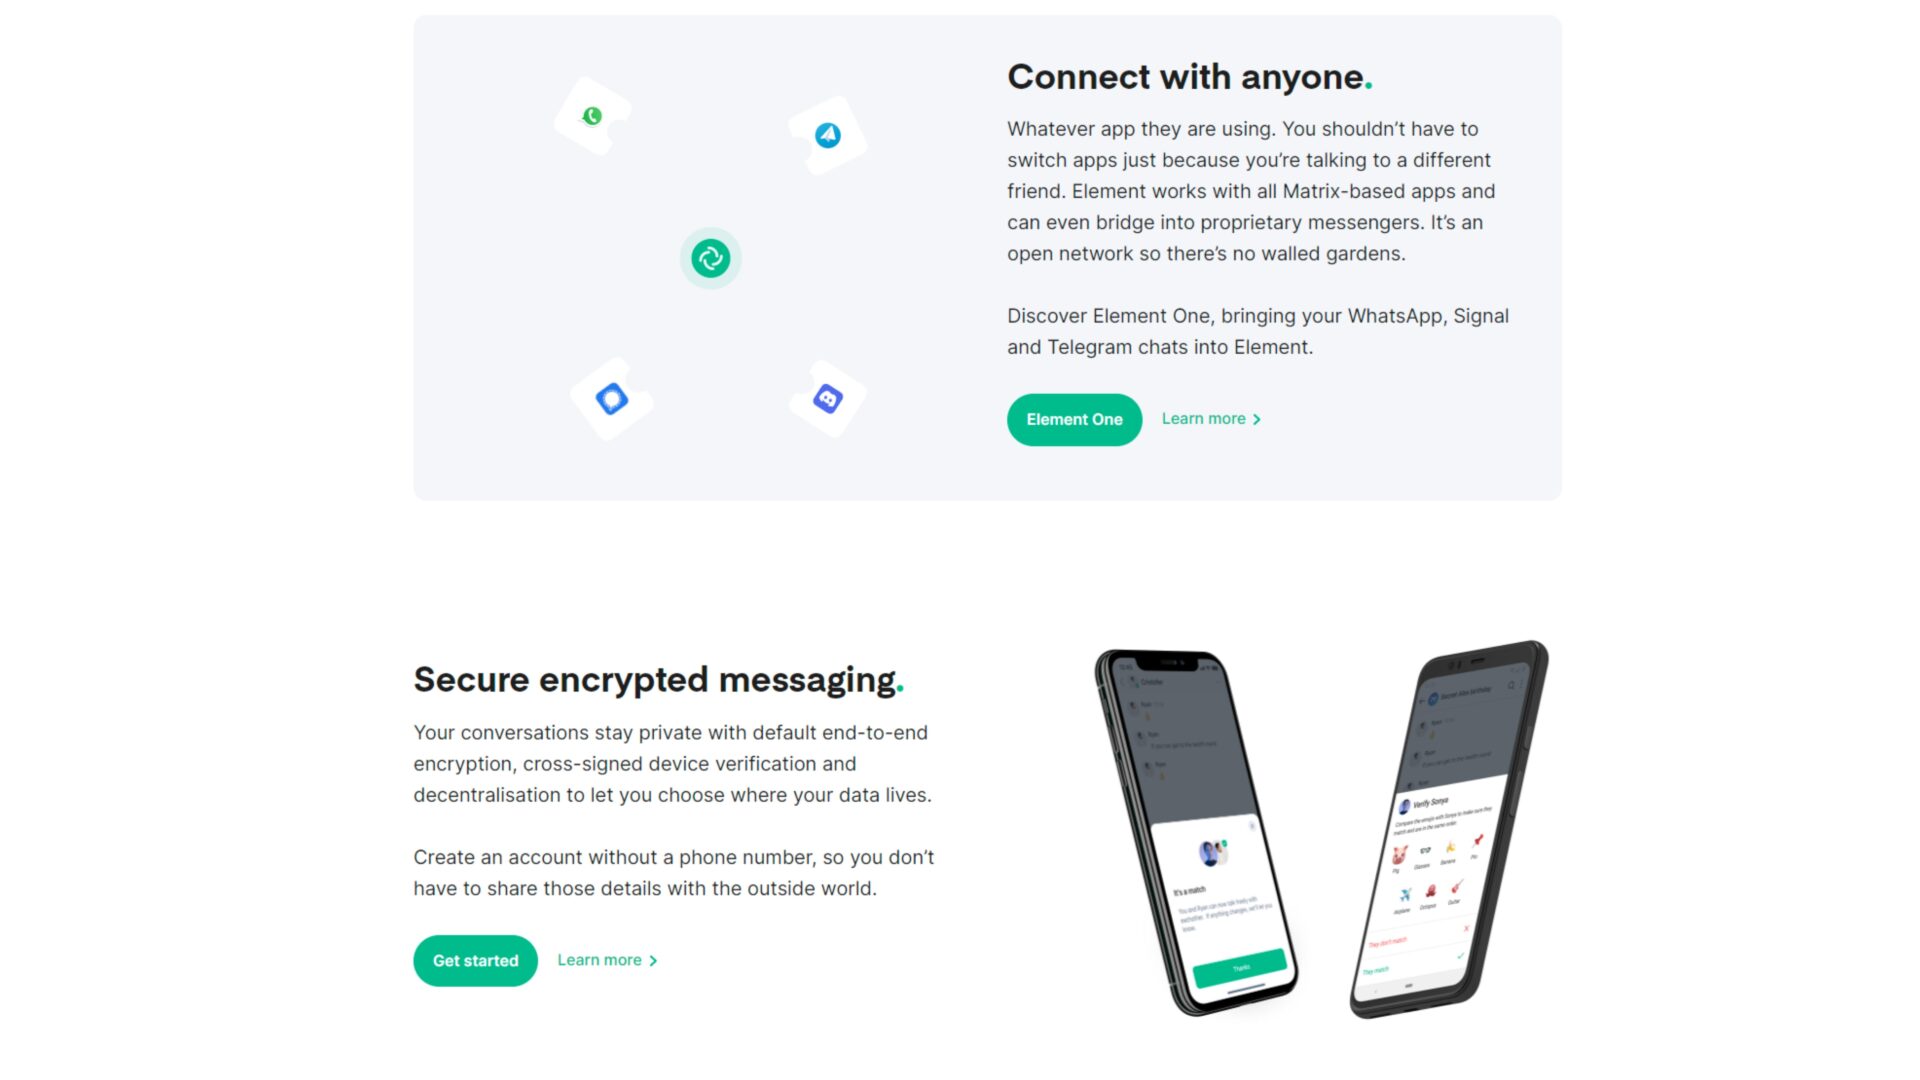 Secure Encrypted Messaging